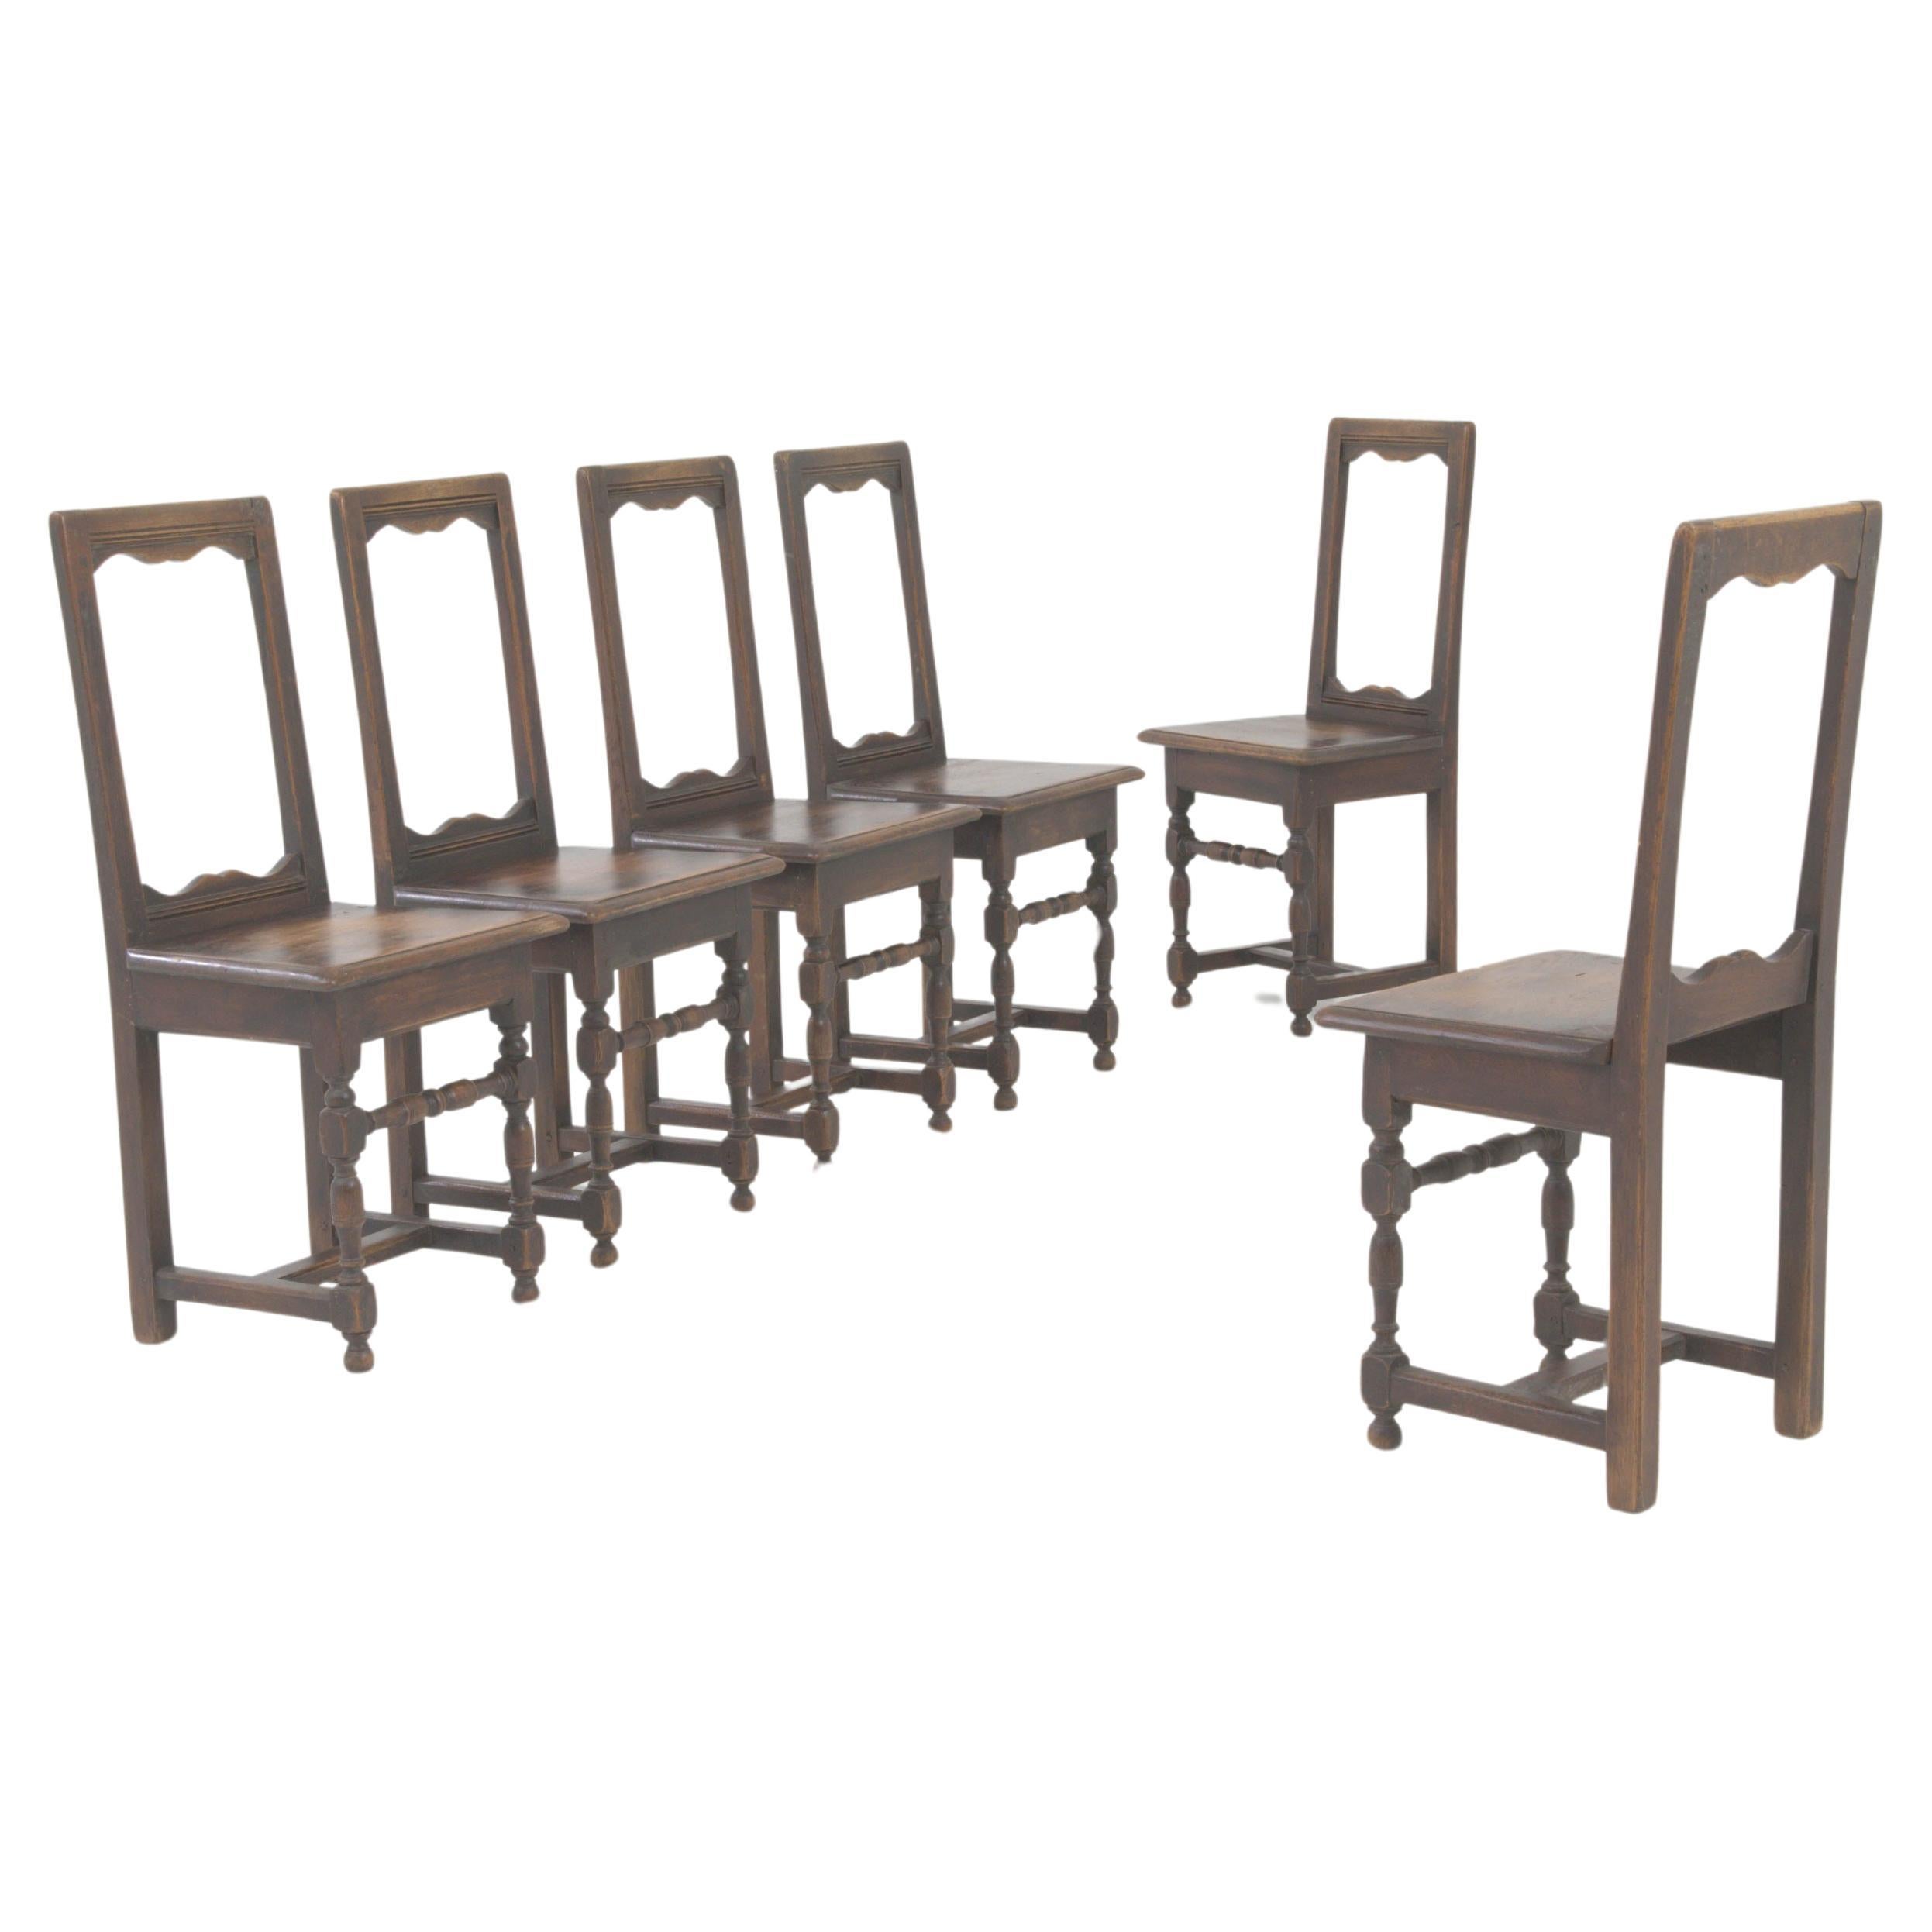 1900s Belgian Wooden Dining Chairs, Set of 6 For Sale